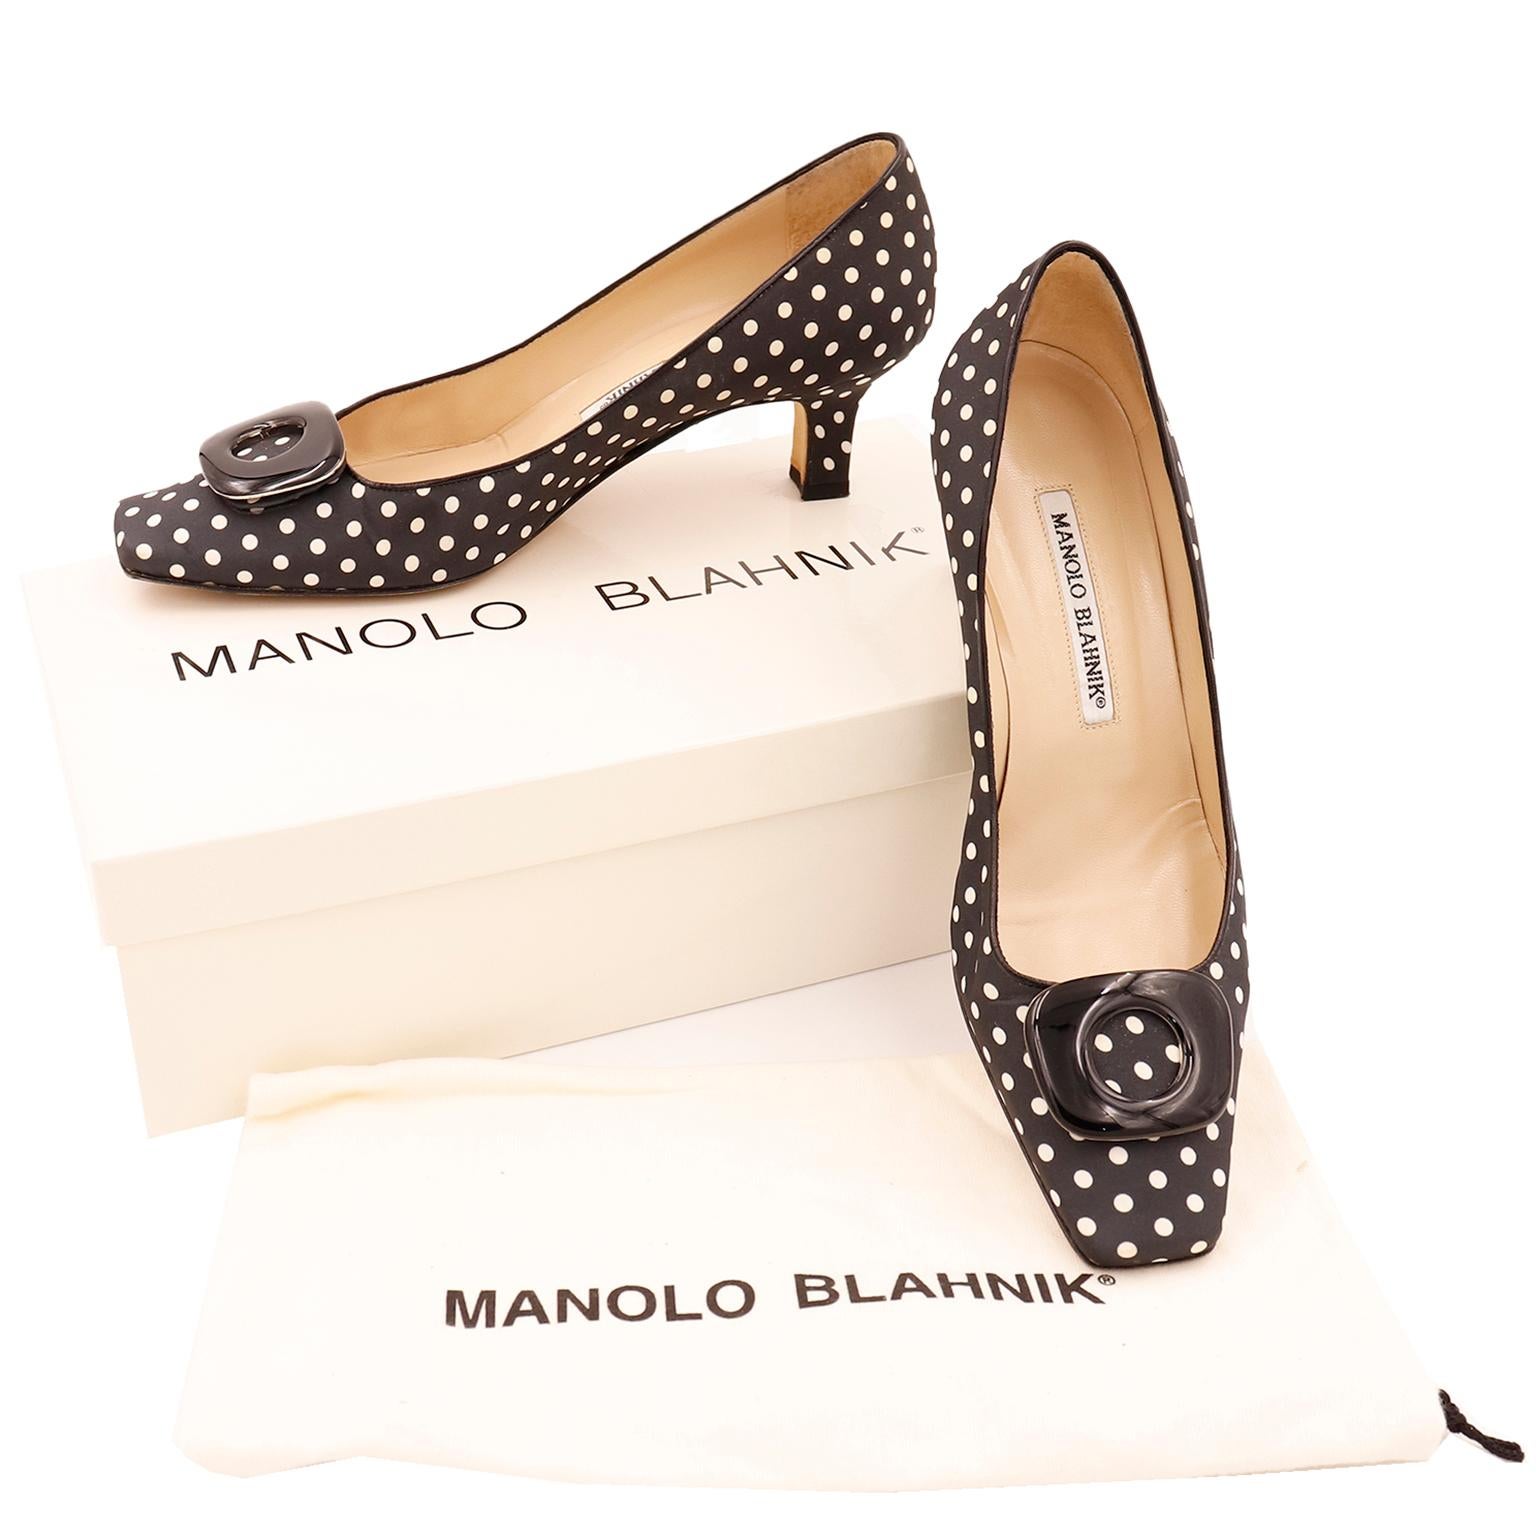 These fun Manolo Blahnik shoes are black with white polka dots. The shoes have tan insoles, leather trim and a gently squared toe. These great shoes have a low heel and attached black buckles. These come with their original box and Manolo Blahnik